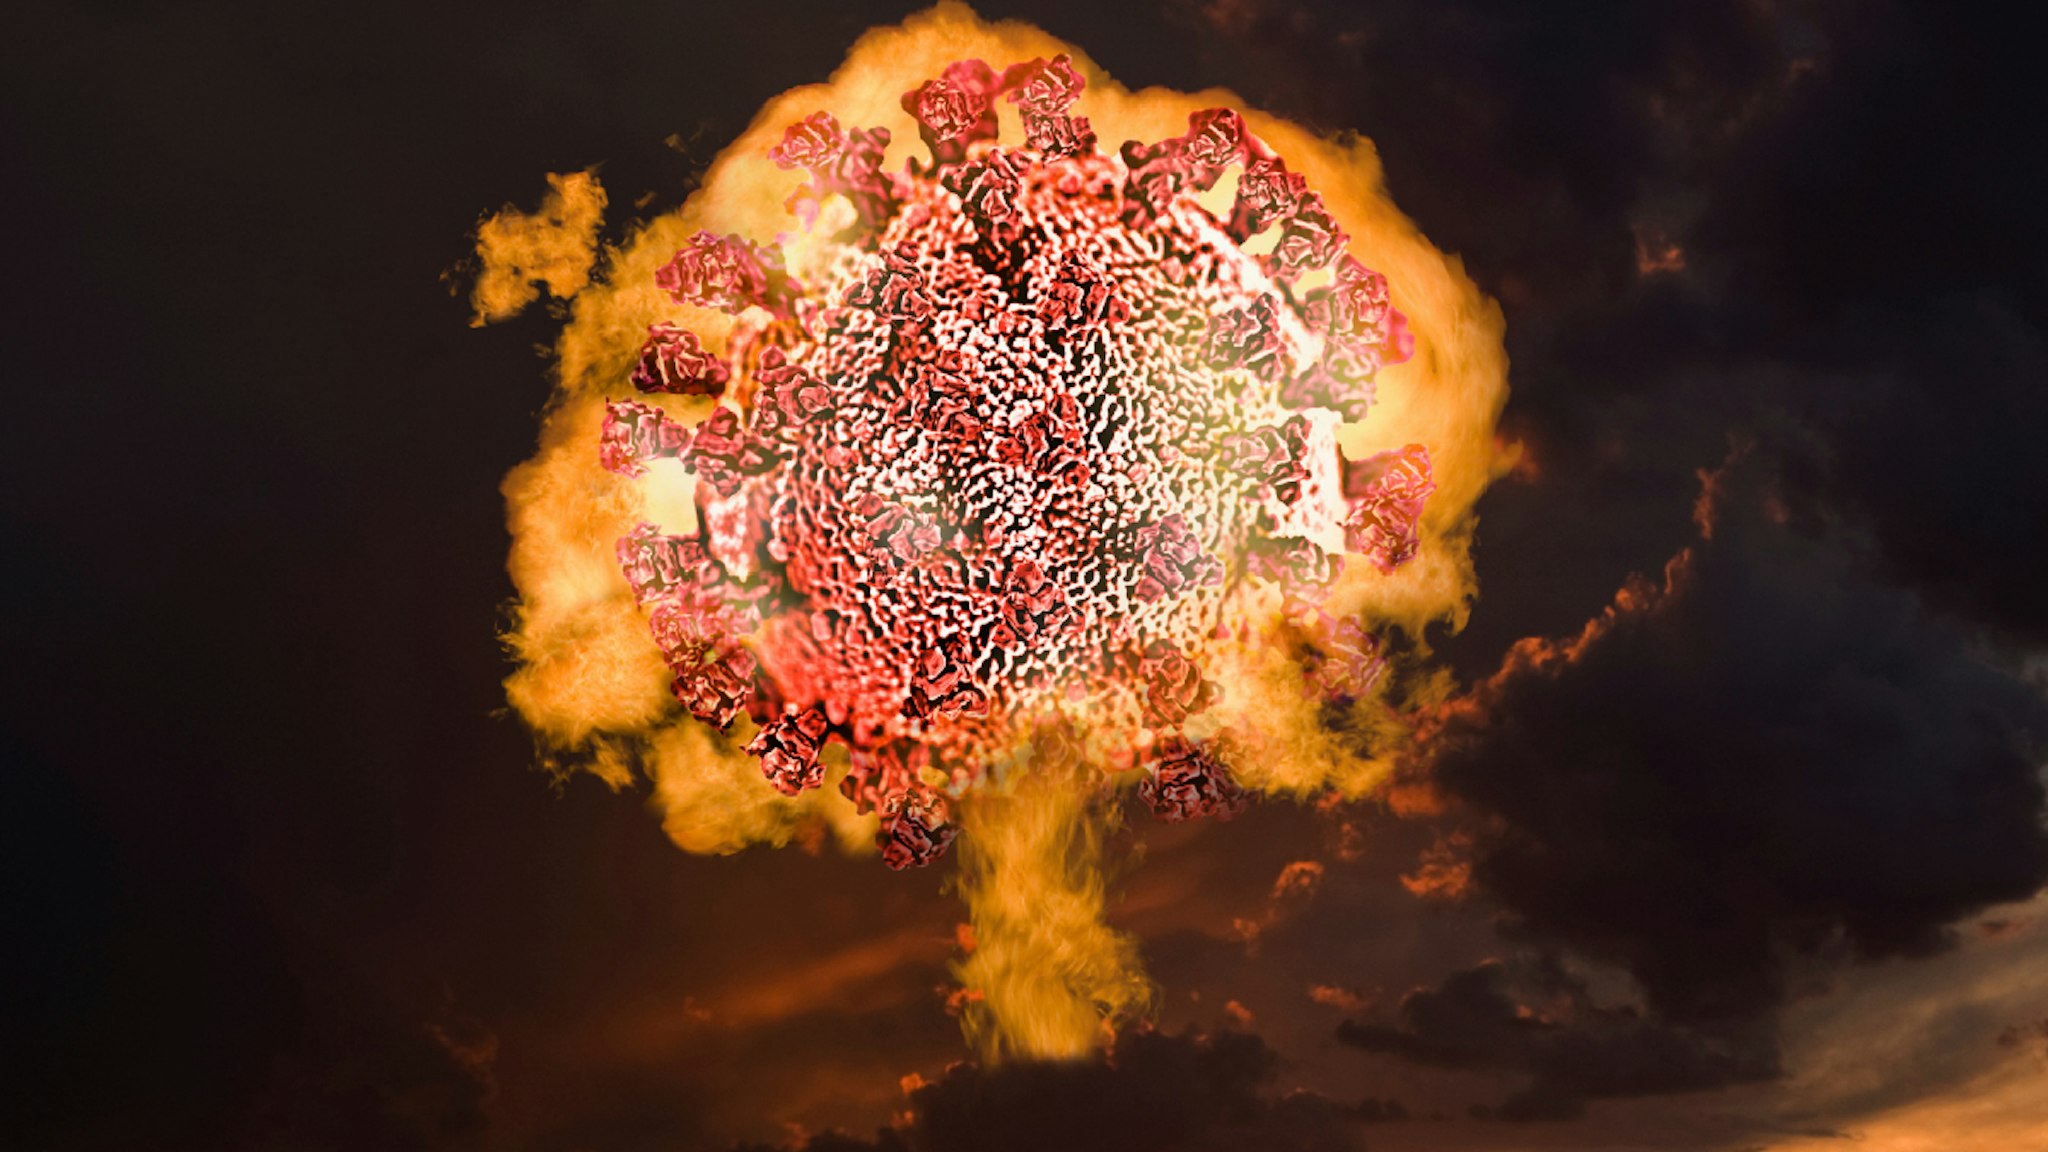 A fireball mushroom cloud rises up filled with a coronavirus molecule in an image about the explosion of coronavirus, Covid-19 and other viral diseases.